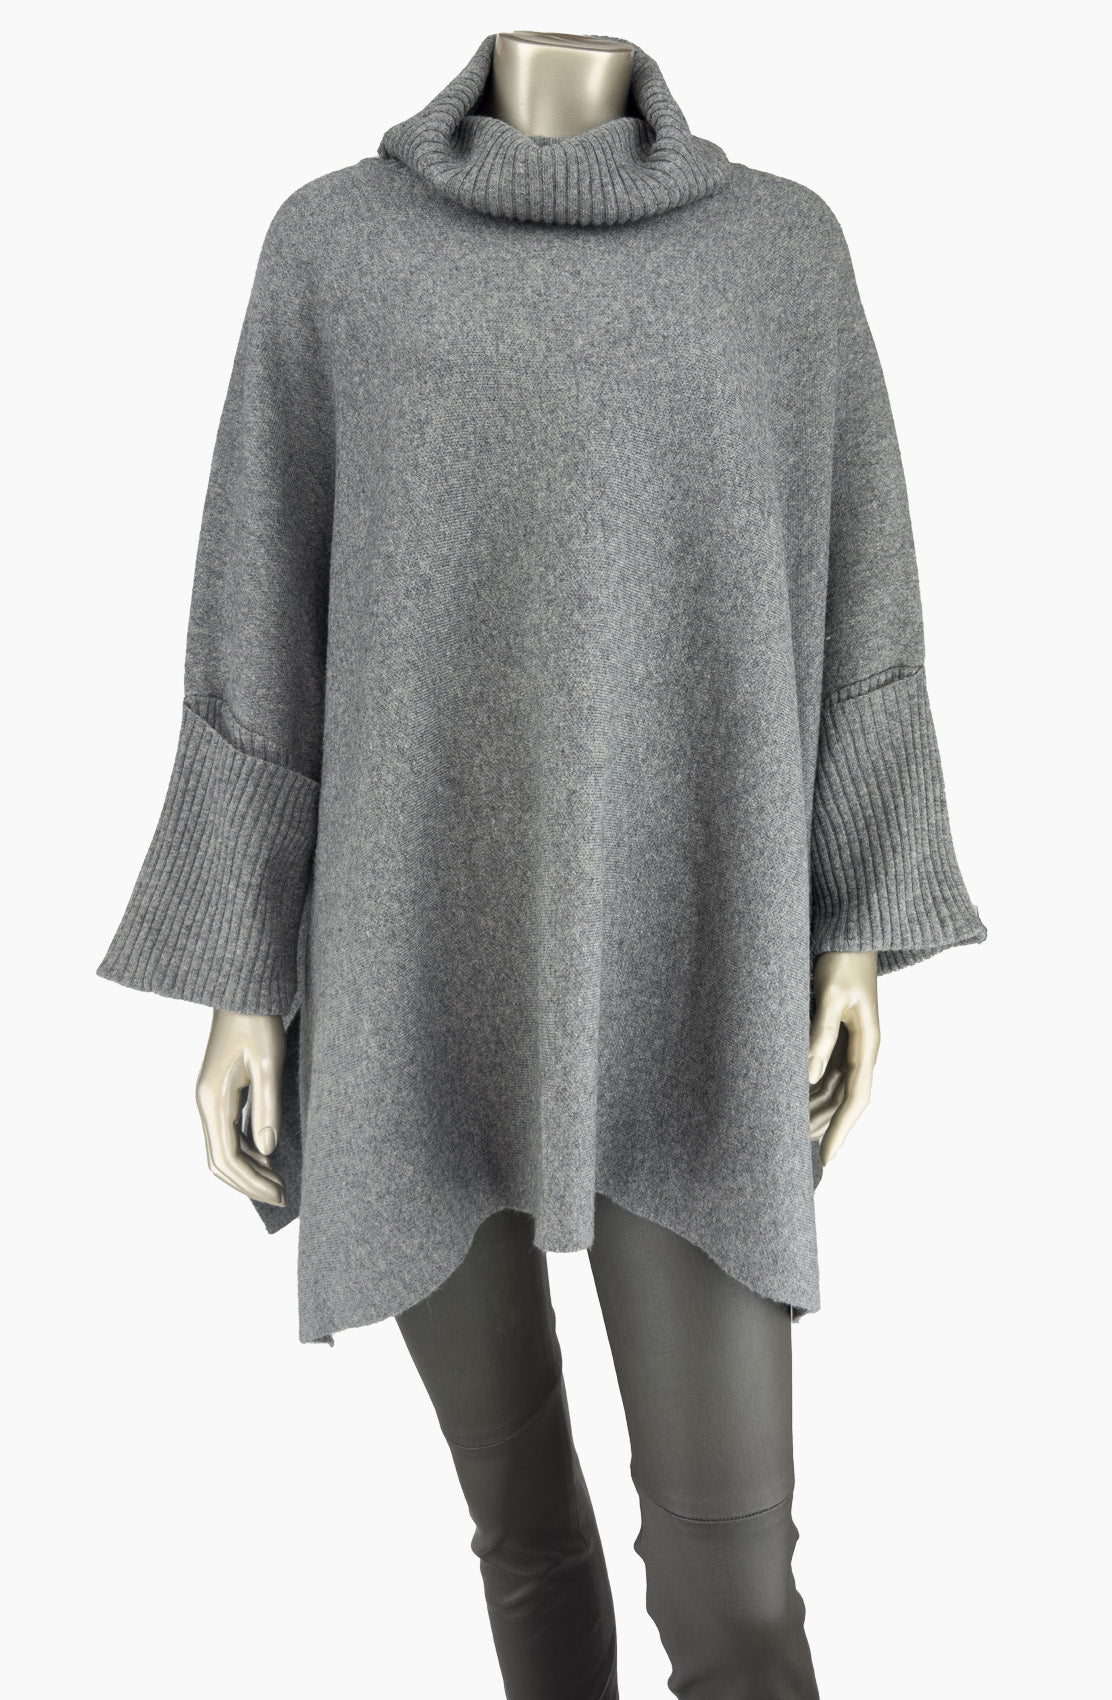 Outlet: Tunic size: 10